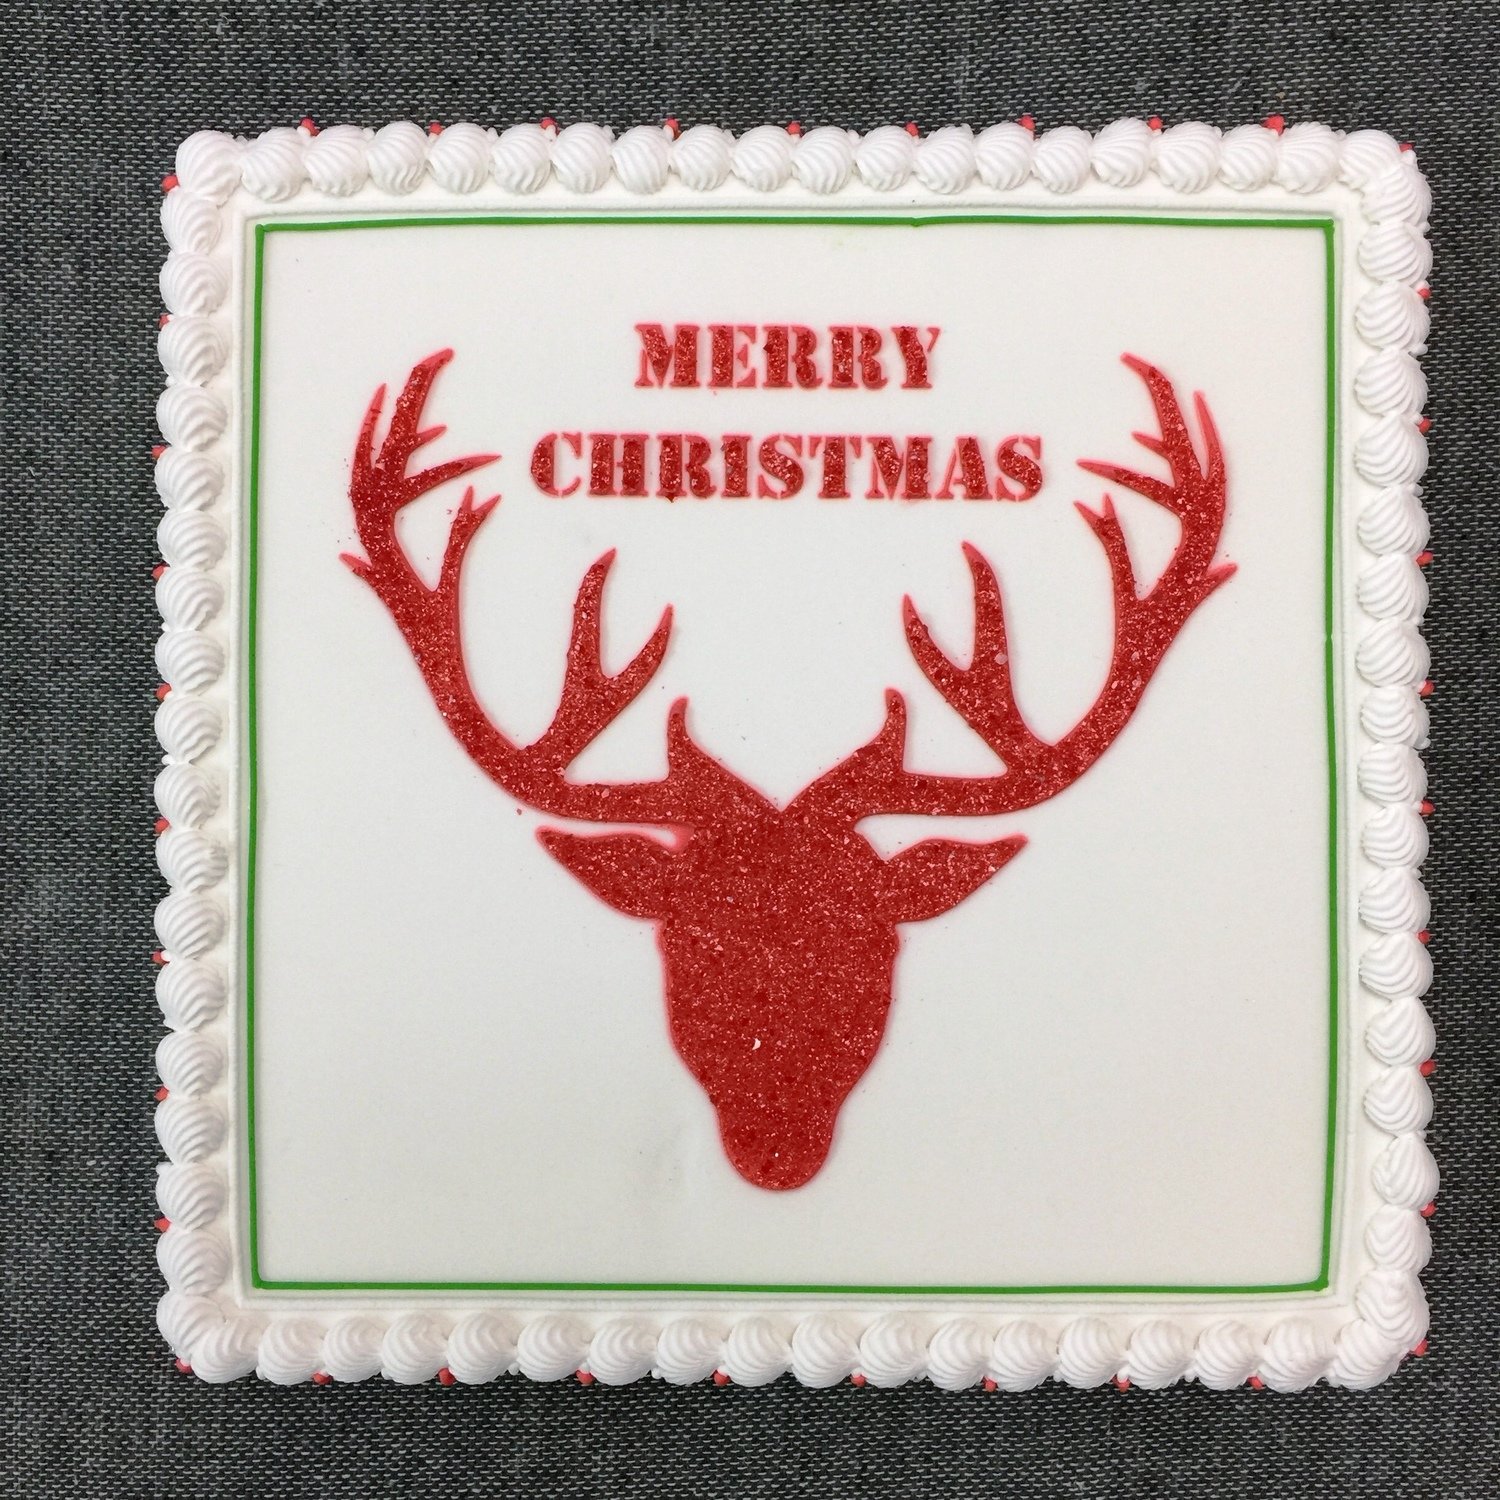 Square Cake with Reindeer Sparkle Silhouette